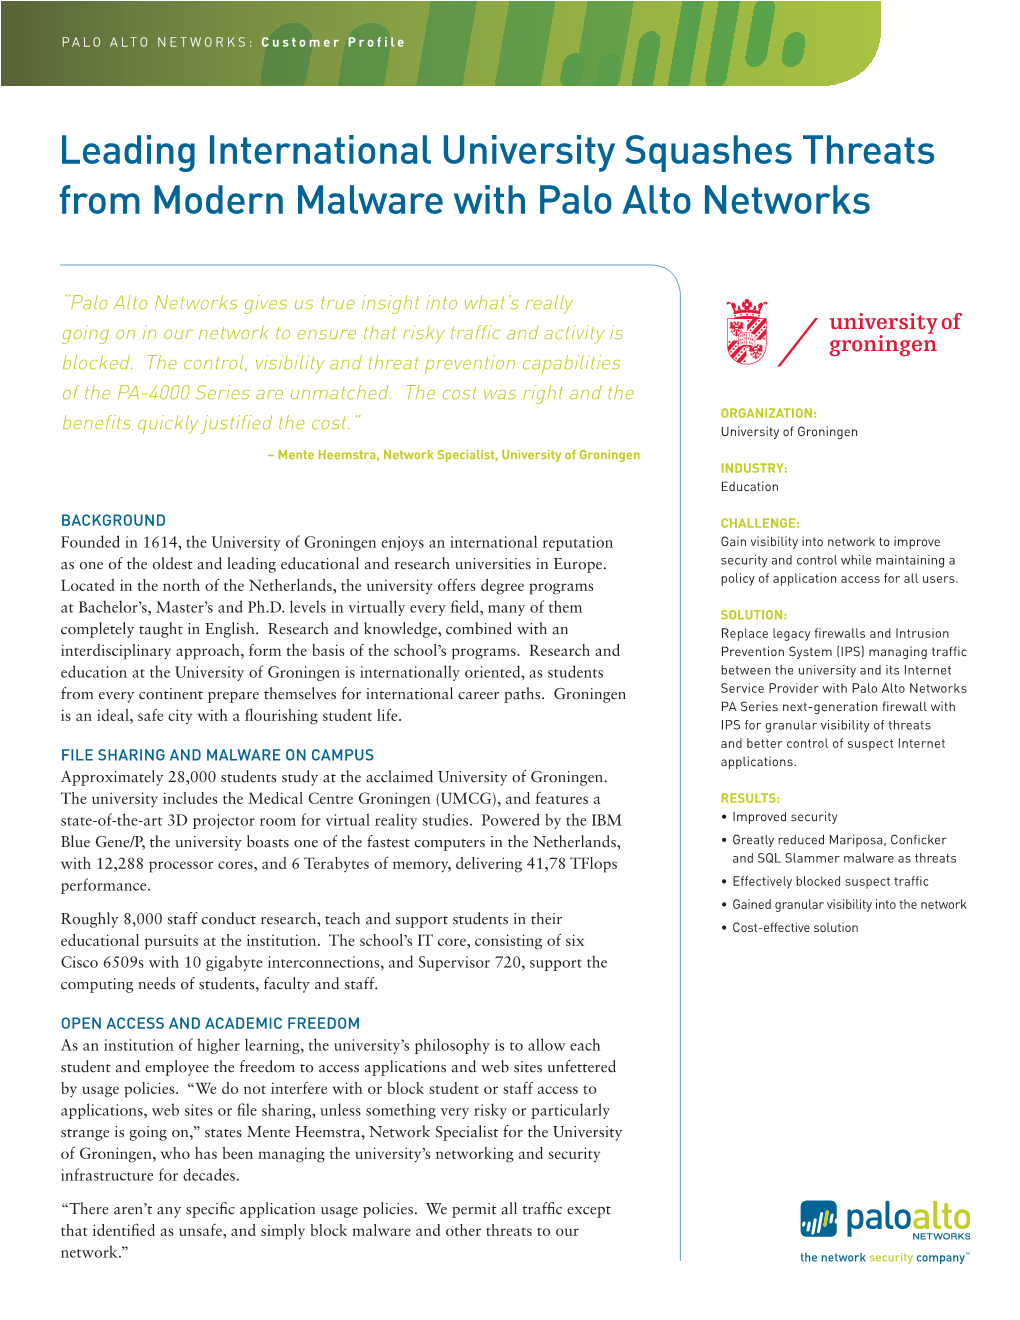 Leading International University Squashes Threats from Modern Malware with Palo Alto Networks